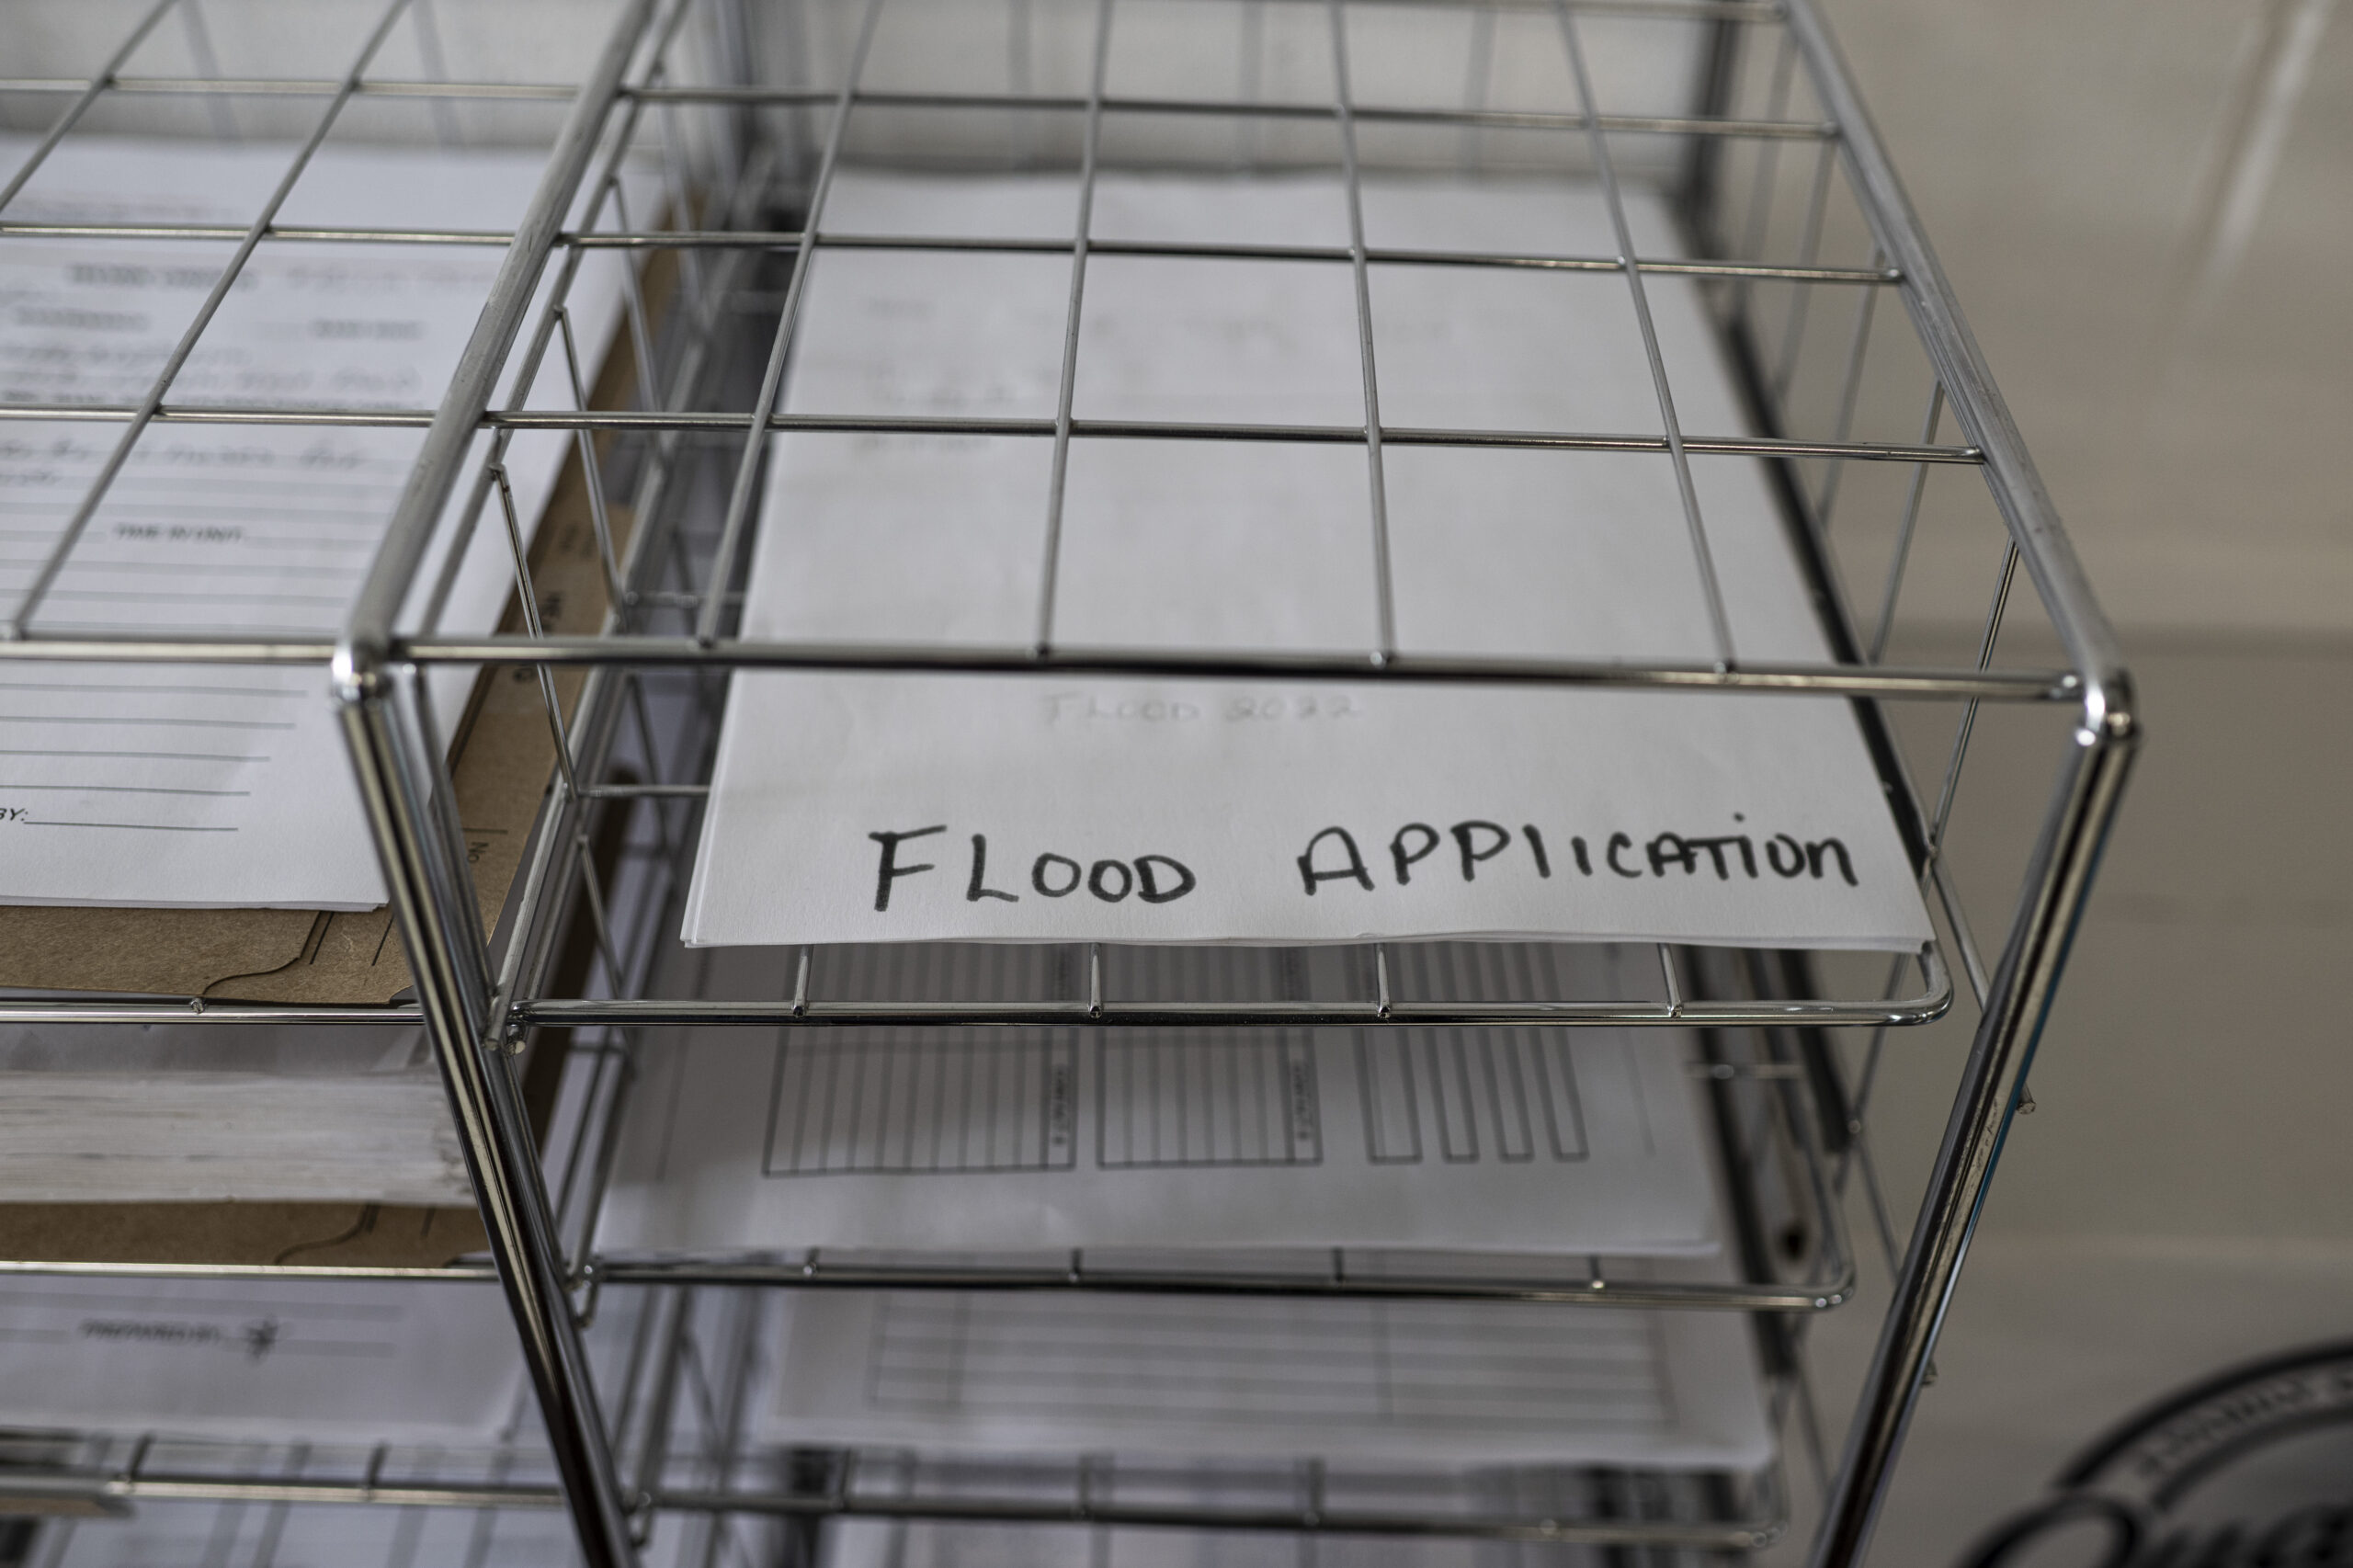 a piece of paper reading 'flood application' sits in a wire rack